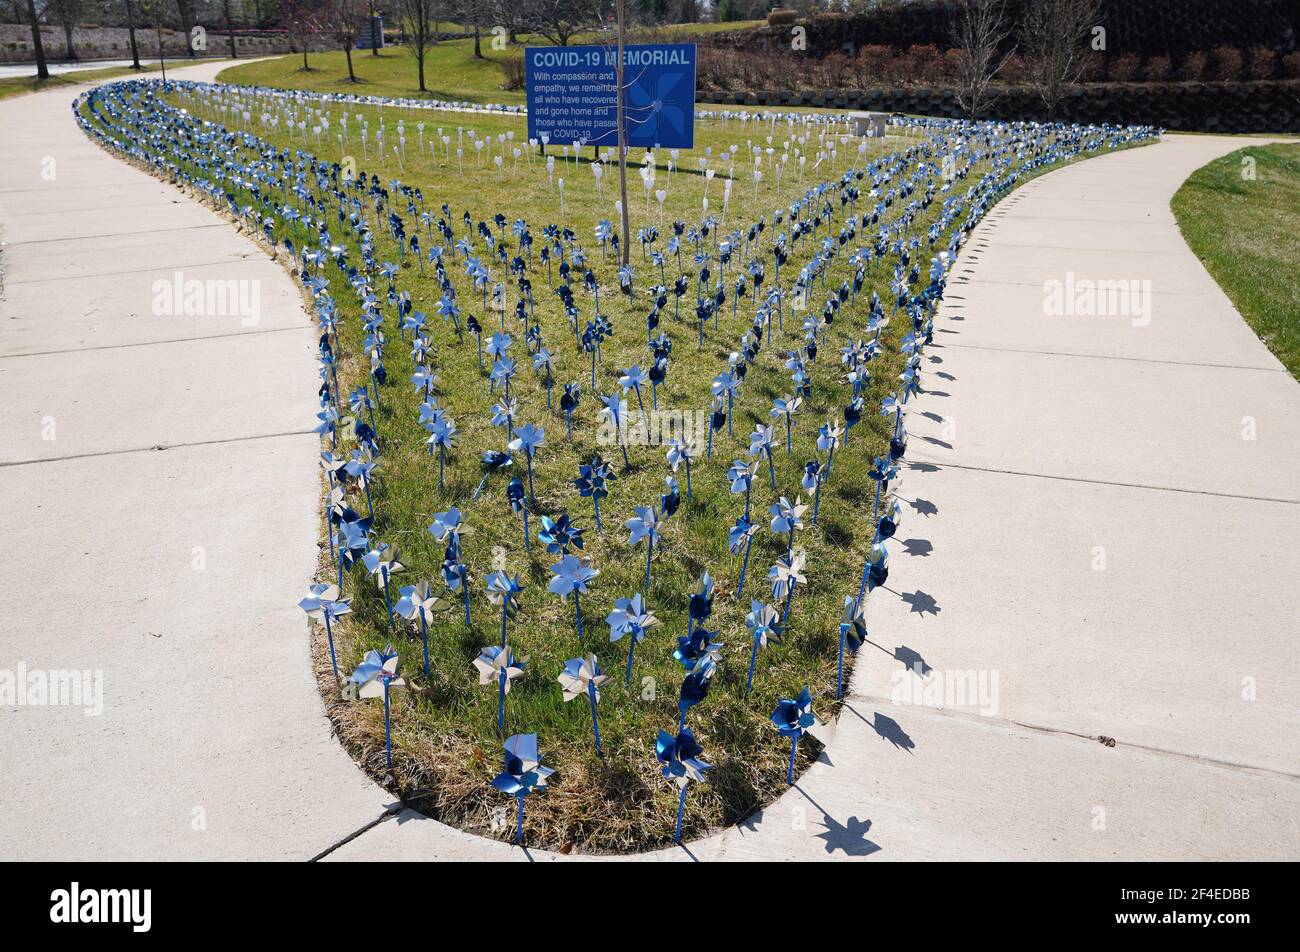 Creve Coeur, United States. 20th Mar, 2021. A memorial for those that have had the COVID-19 disease is on display at Missouri Baptist Hospital in Creve Coeur, Missouri on Saturday, March 20, 2021. The hospital received confirmation on March 19, 2020, of it's first confirmed patient with COVID-19. One year later Missouri Baptist honors the 1,550 patients who recovered from the virus with purple pinwheels, while the 270 that died from the COVID-19 virus are honored with white hearts. Photo by Bill Greenblatt/UPI Credit: UPI/Alamy Live News Stock Photo